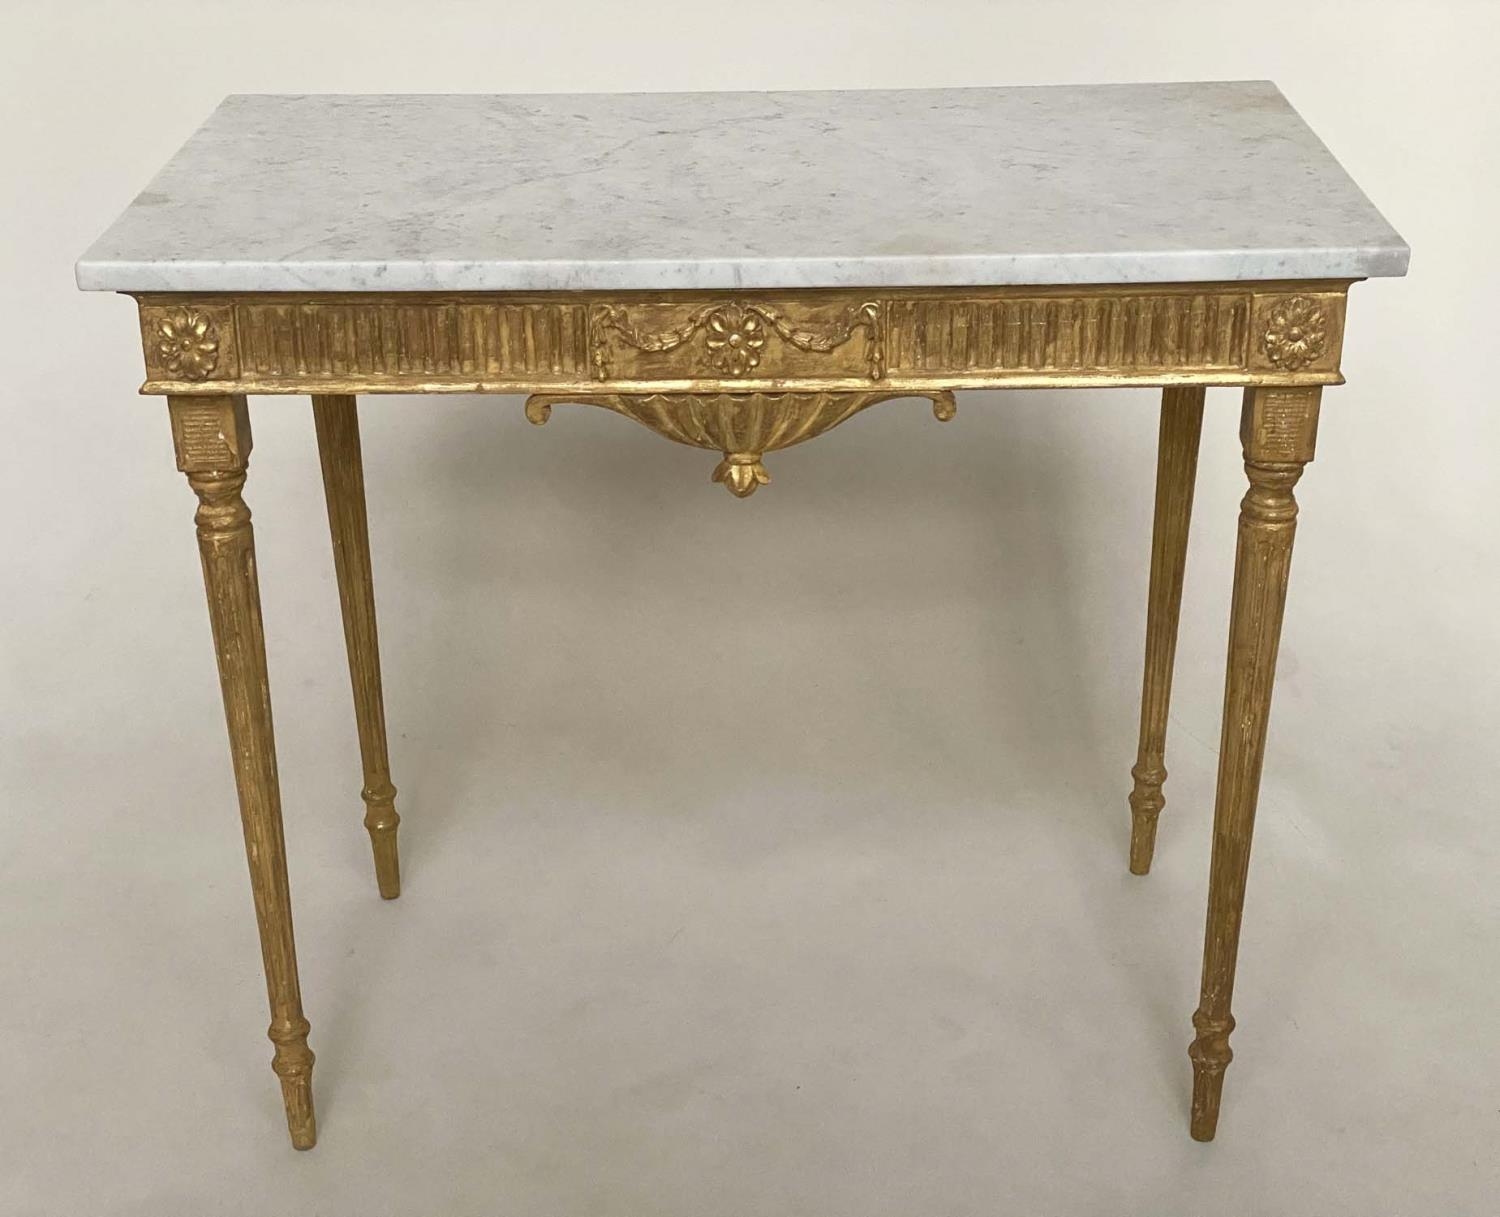 CONSOLE TABLE, 19th century Italian giltwood with Carrara marble top, fluted frieze, ribbon tablet